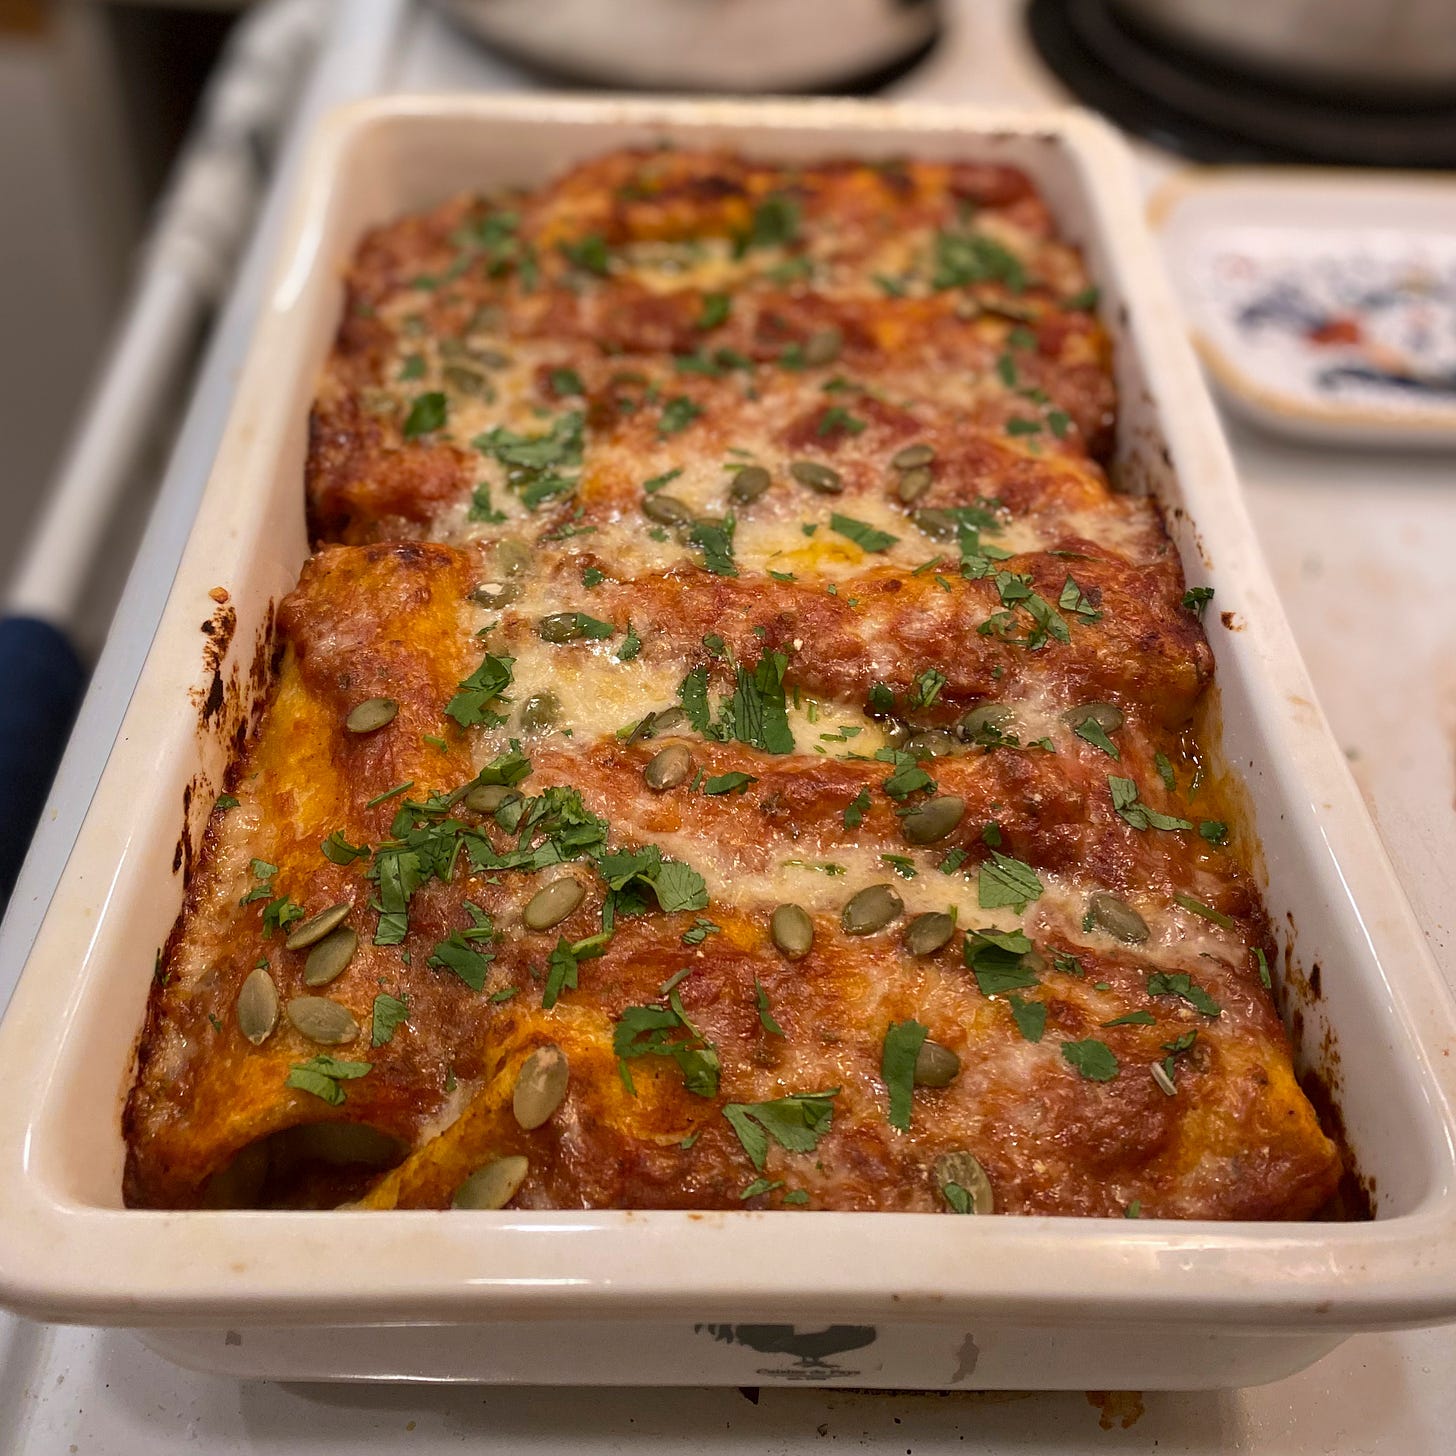 A white ceramic baking dish of the enchiladas. Sauce has caramelized around the edges and they are covered in melted white cheddar, a sprinkling of cilantro, and pumpkin seeds.